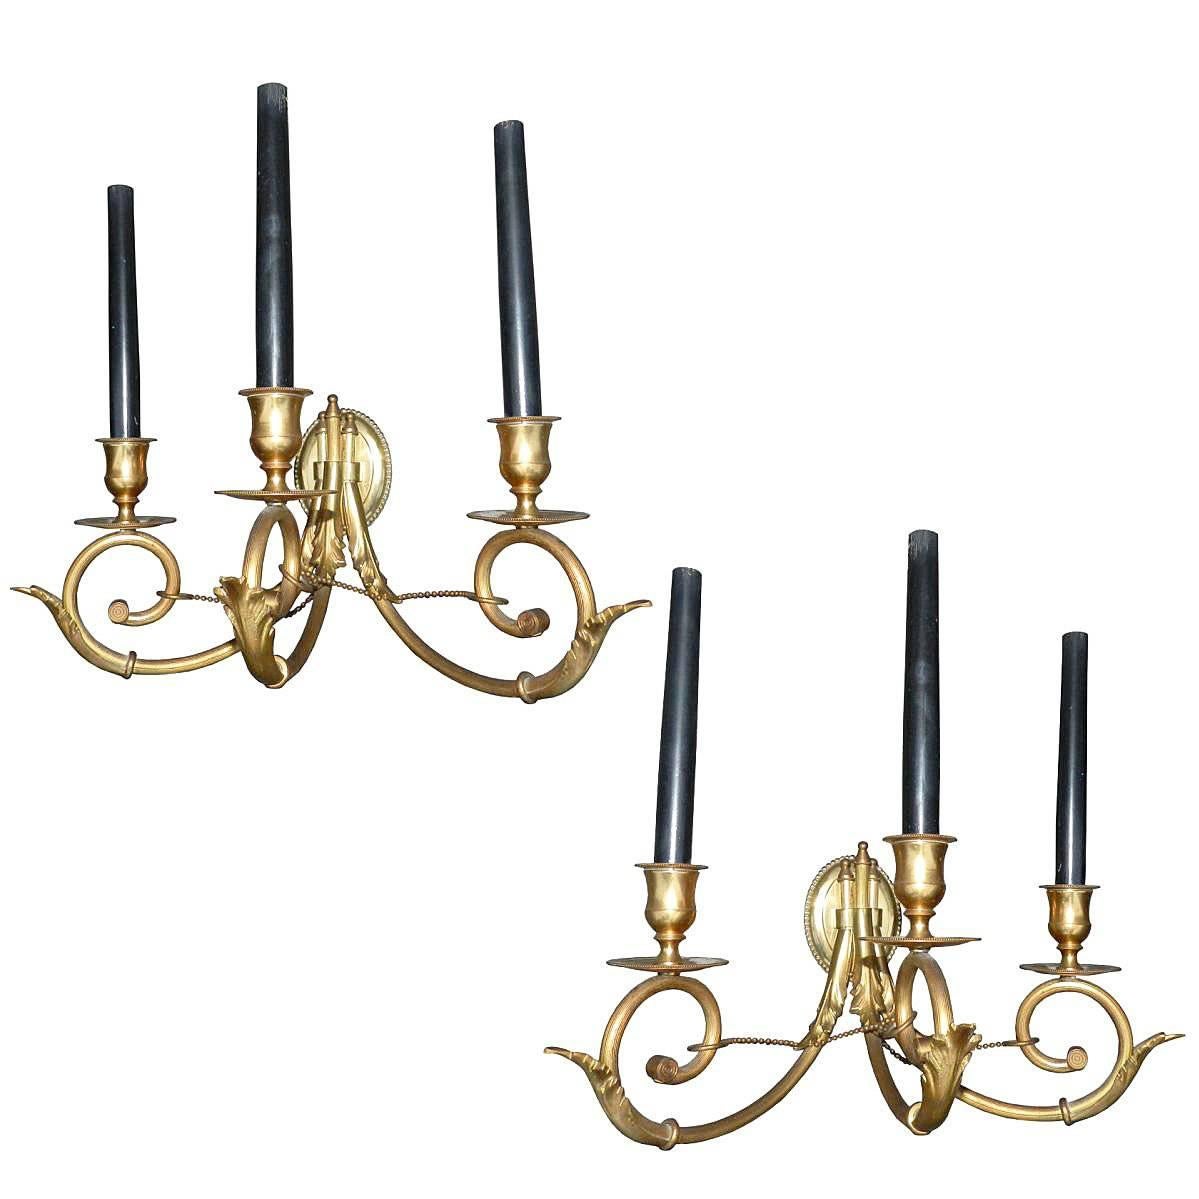 Pair of Neoclassical Brass Sconces, circa 1950